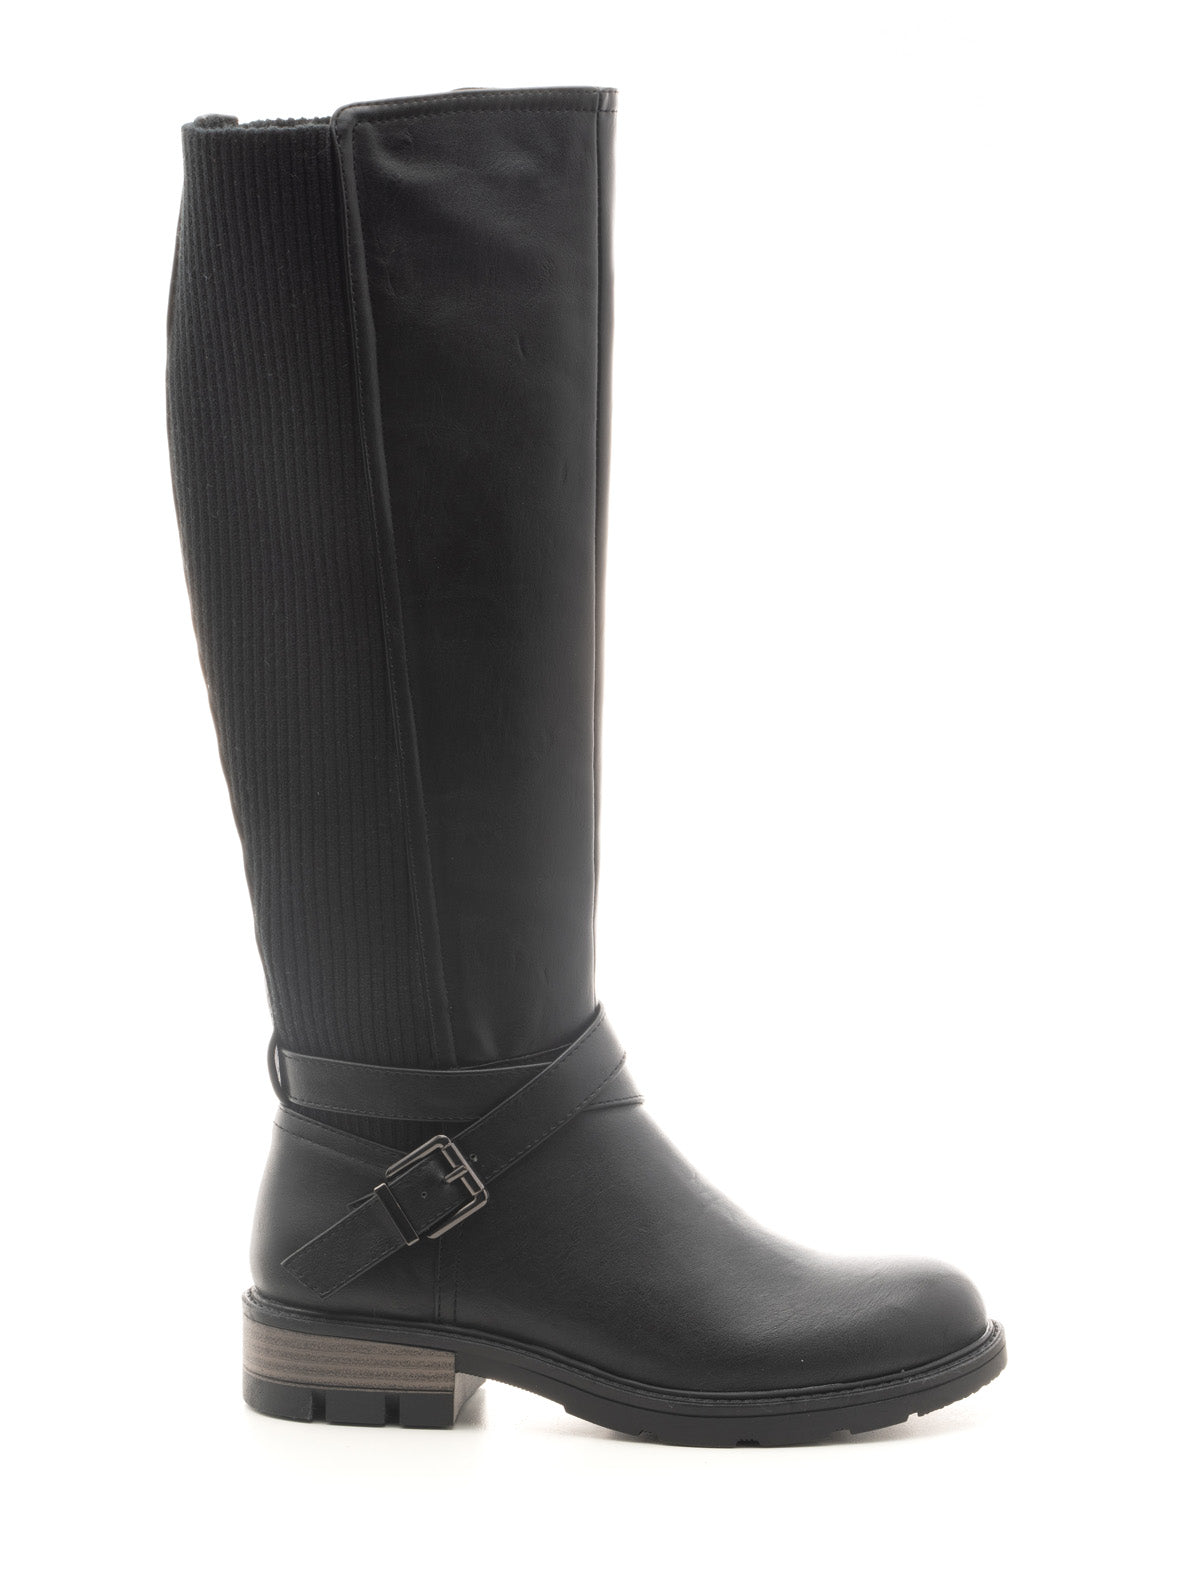 Corkys "Hayride" Tall Boots in Black Final Sale